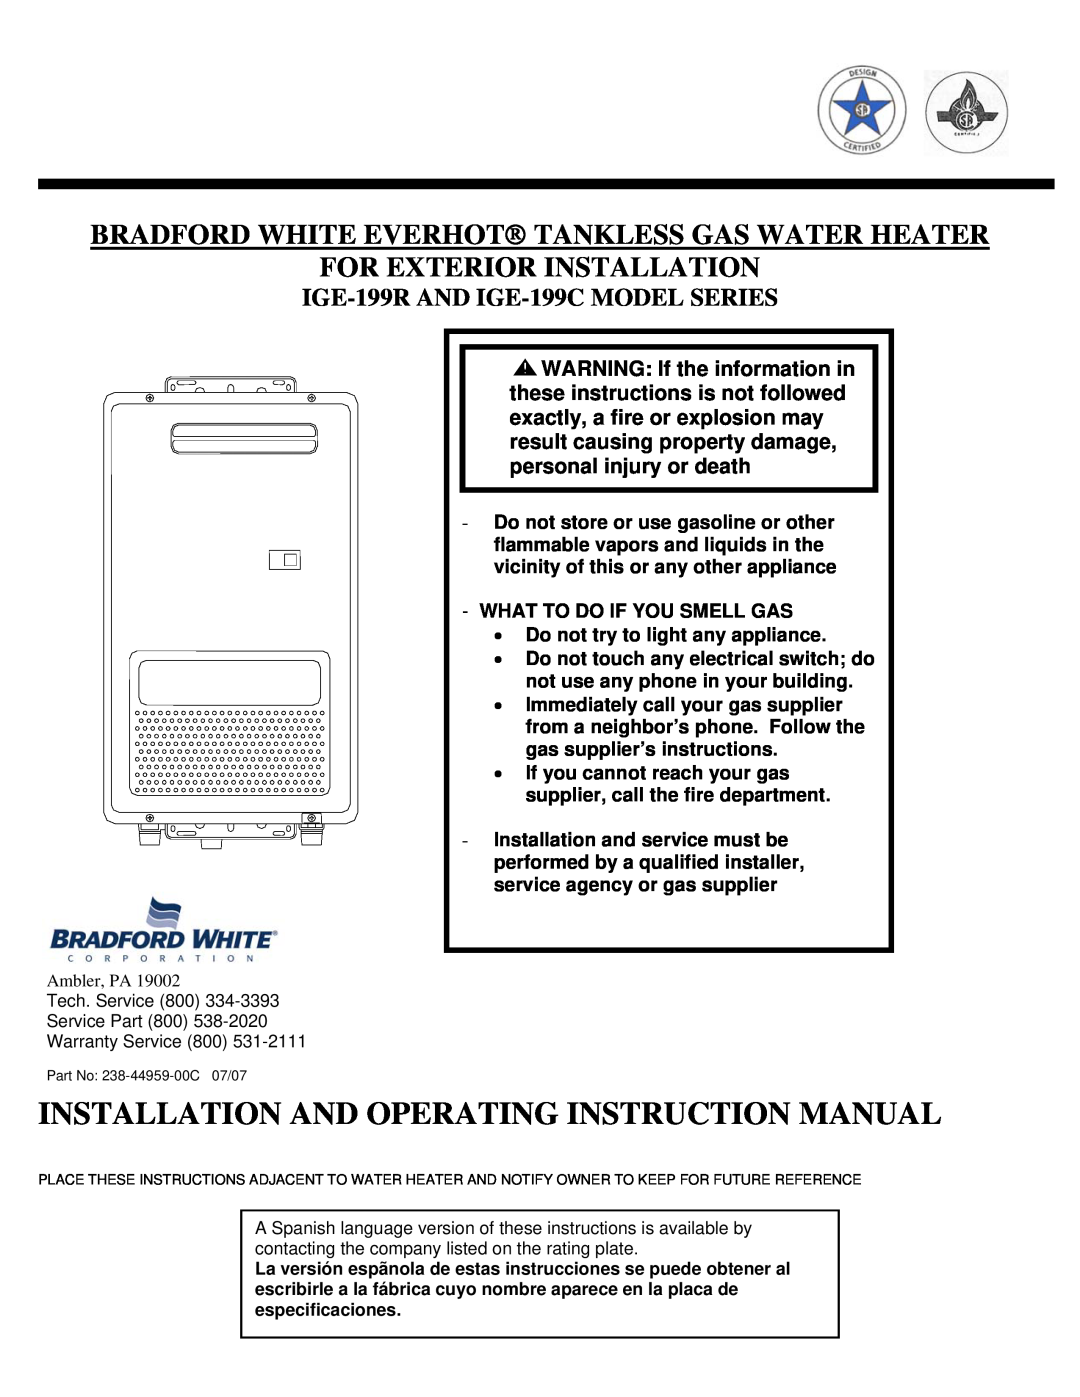 Bradford-White Corp IGE-199C Series, IGE-199R Series instruction manual Installation And Operating Instruction Manual 